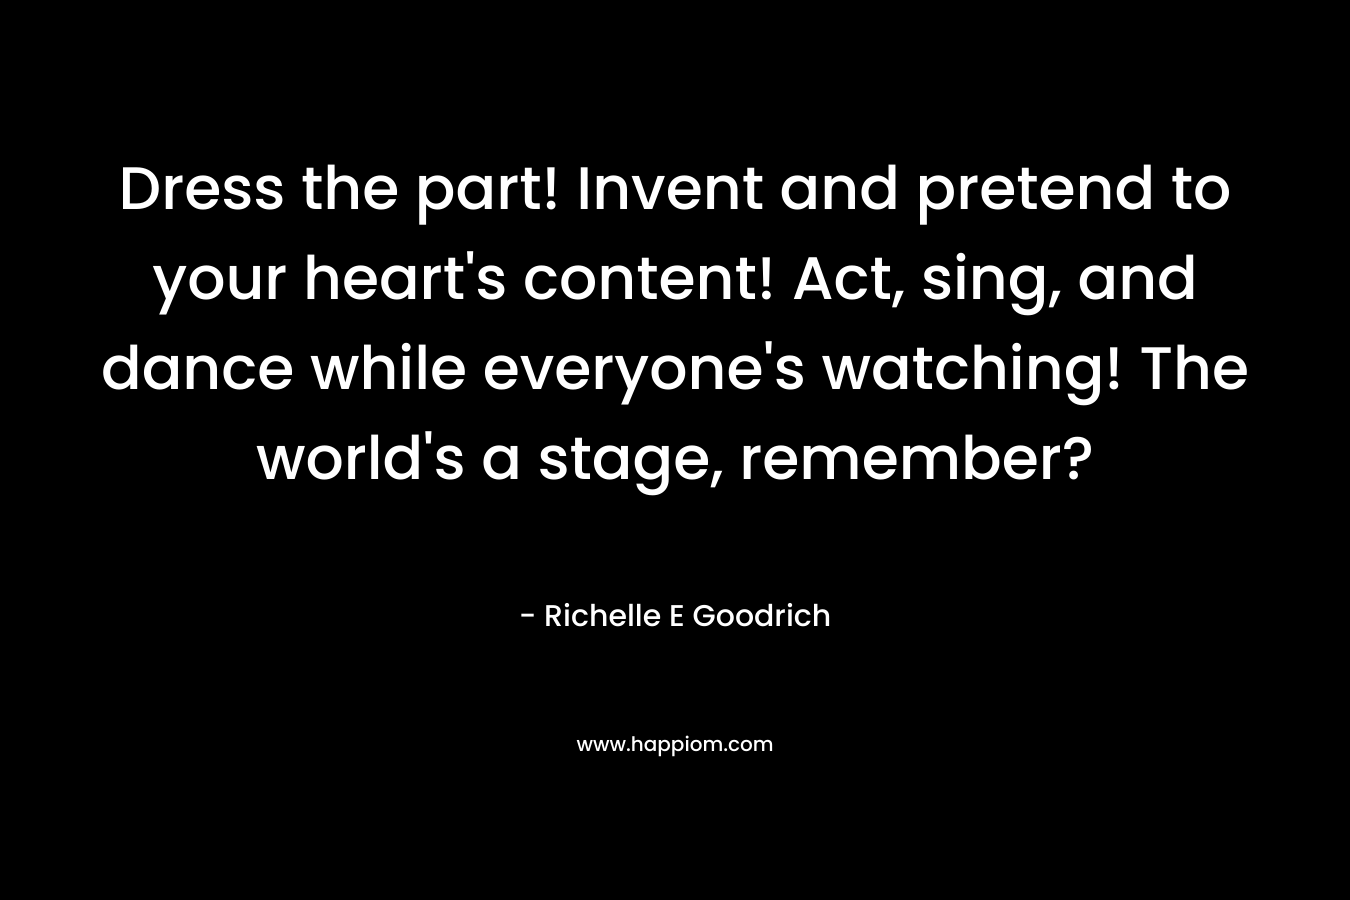 Dress the part! Invent and pretend to your heart's content! Act, sing, and dance while everyone's watching! The world's a stage, remember?